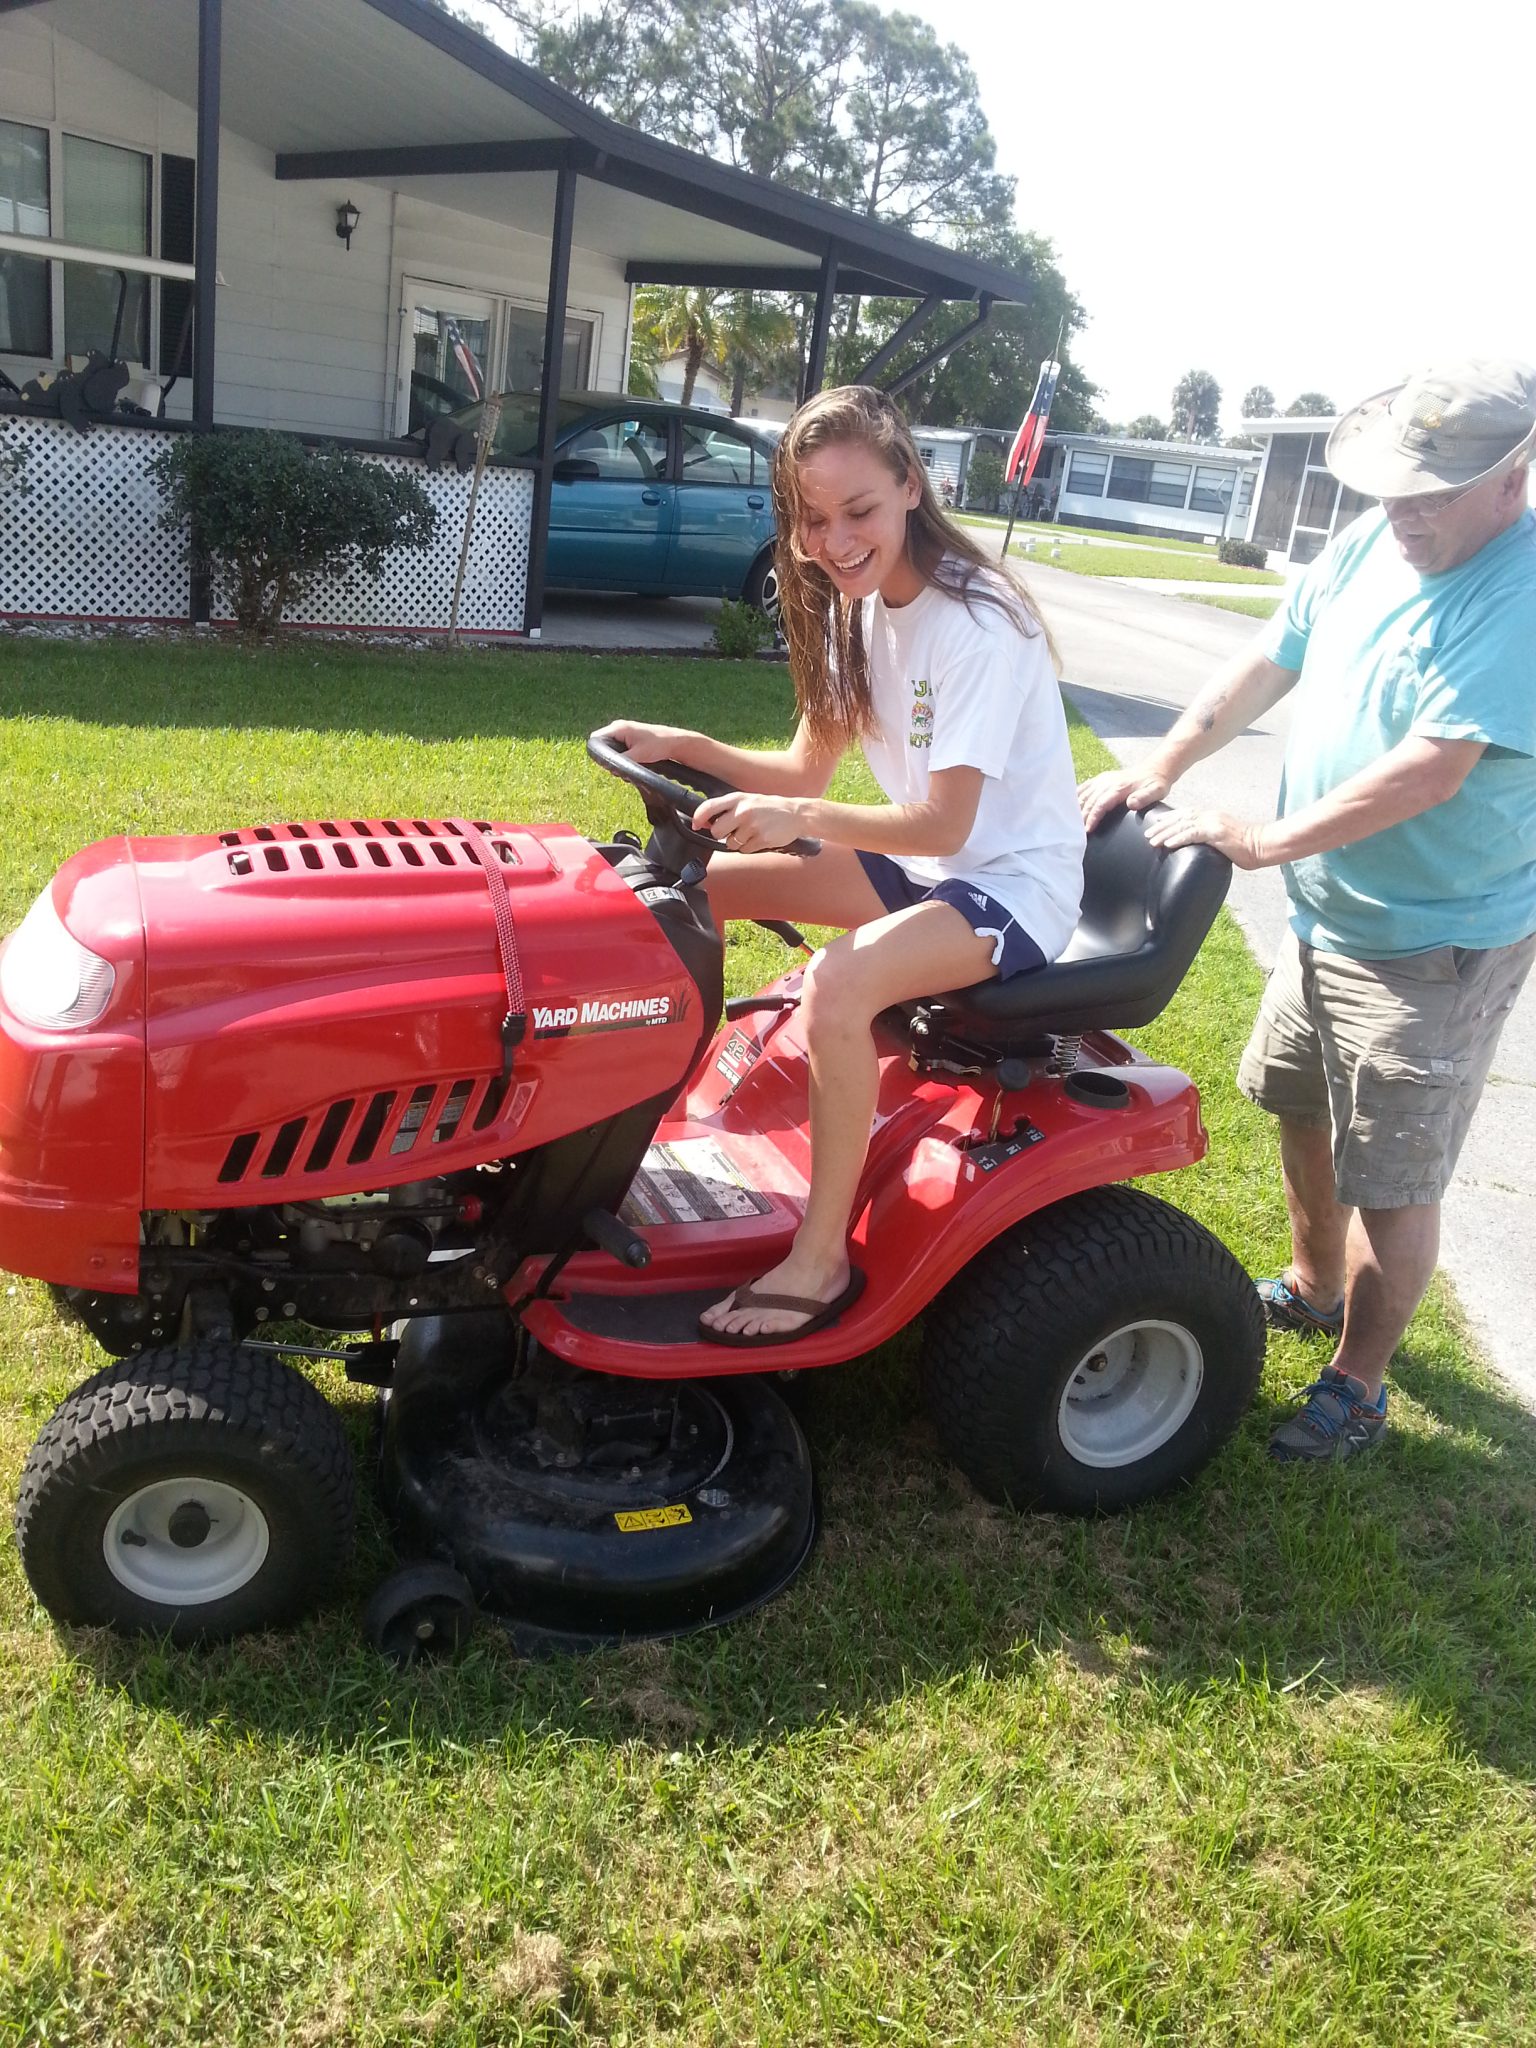 What a great day, Brittany was either too short or not heavy enough to keep the seat down to keep the mower going.